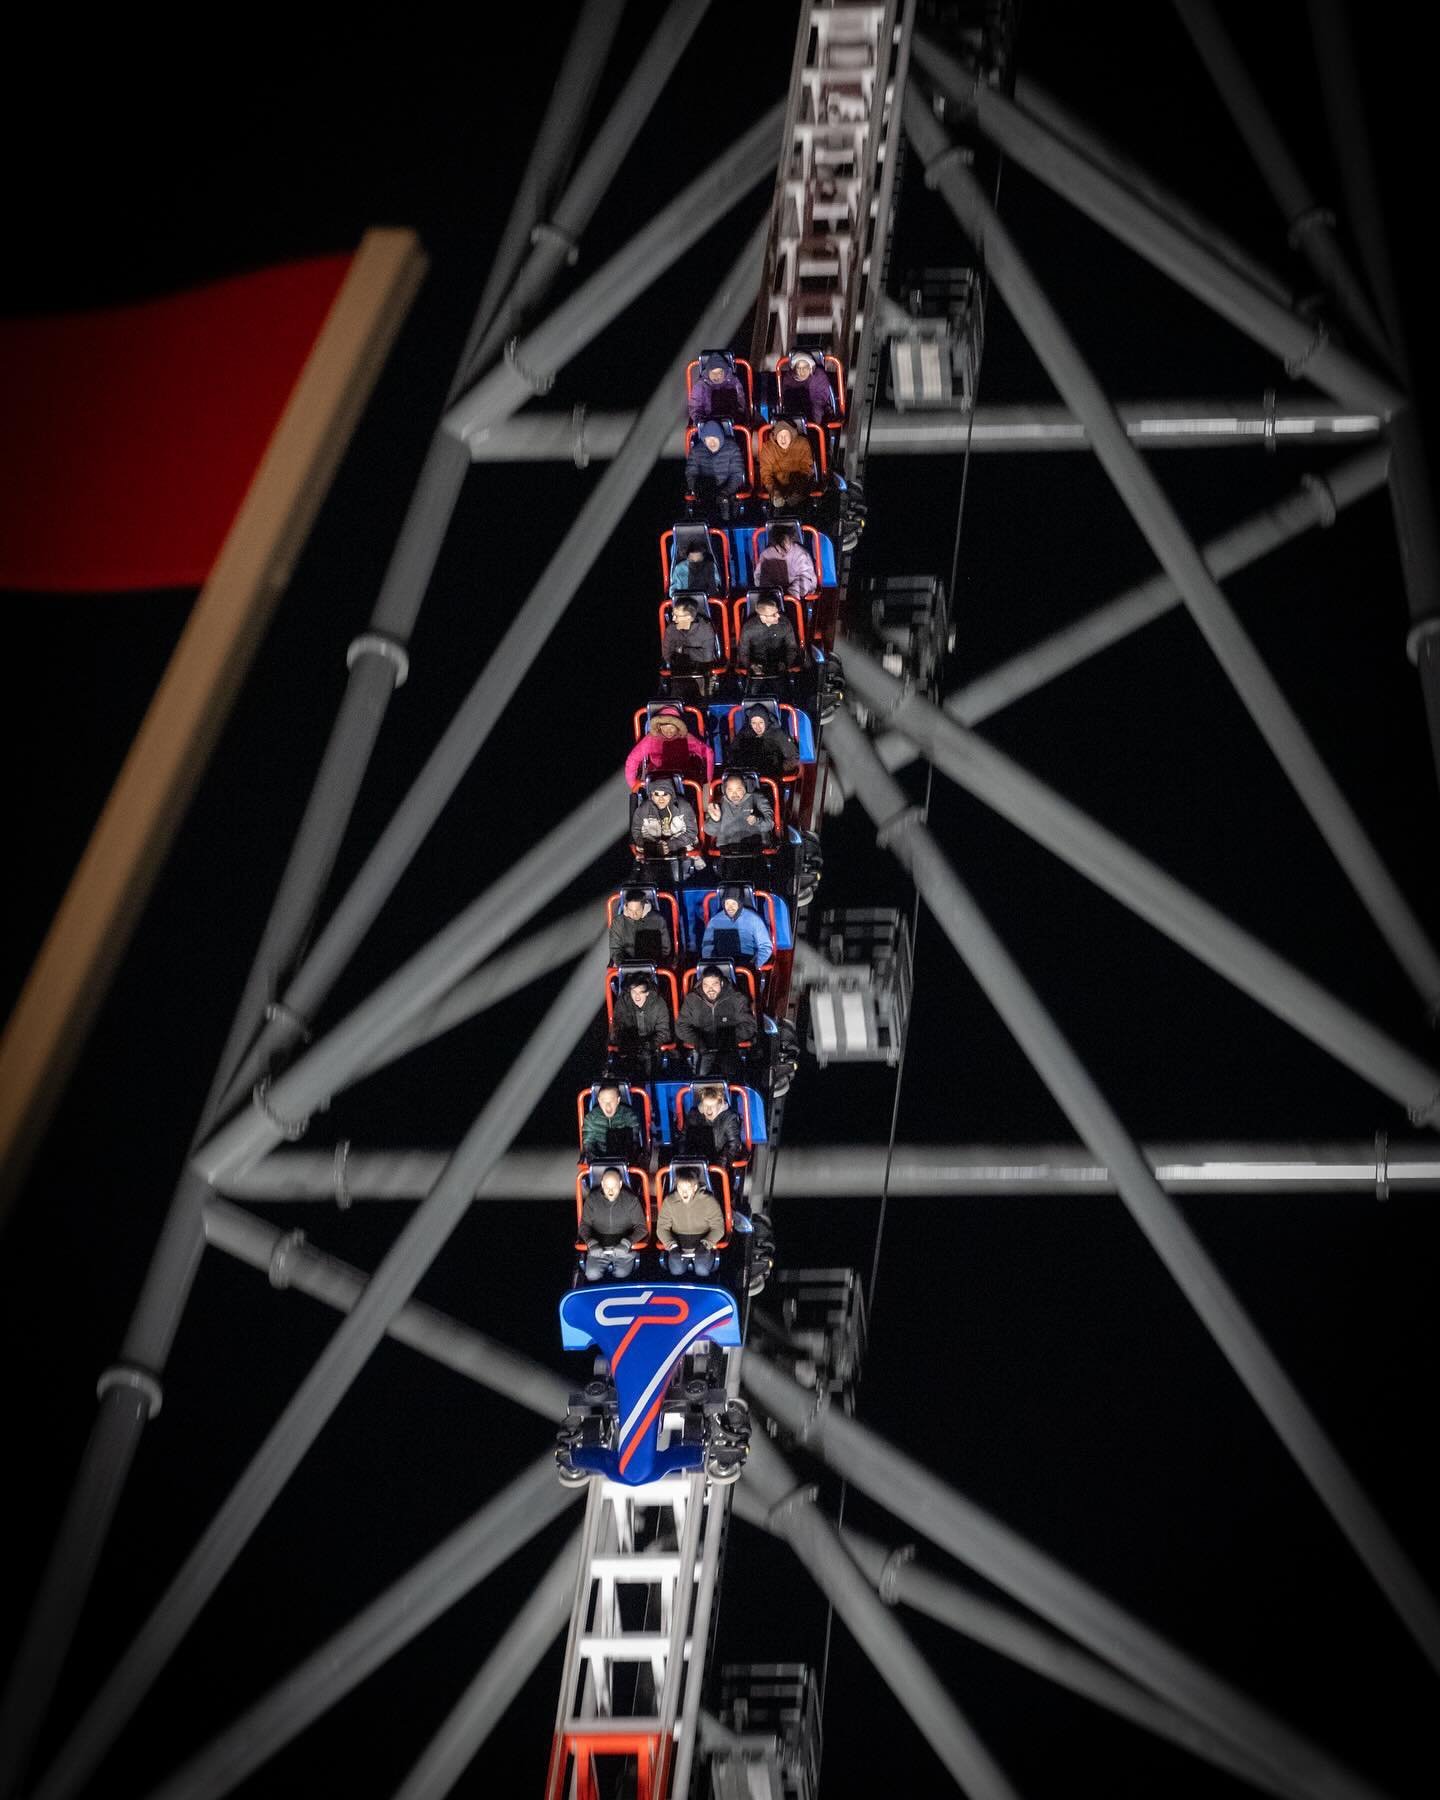 What are your impressions of the all new Top Thrill 2? Today is the first public preview day!! Excited for more people to love this coaster! 
.
🎢 Top Thrill 2 - Cedar Point (@cedarpoint)
.
.
⚙️ Antonio Zamperla spA (@zamperlacoasters) 
.
.
📸: @ceda